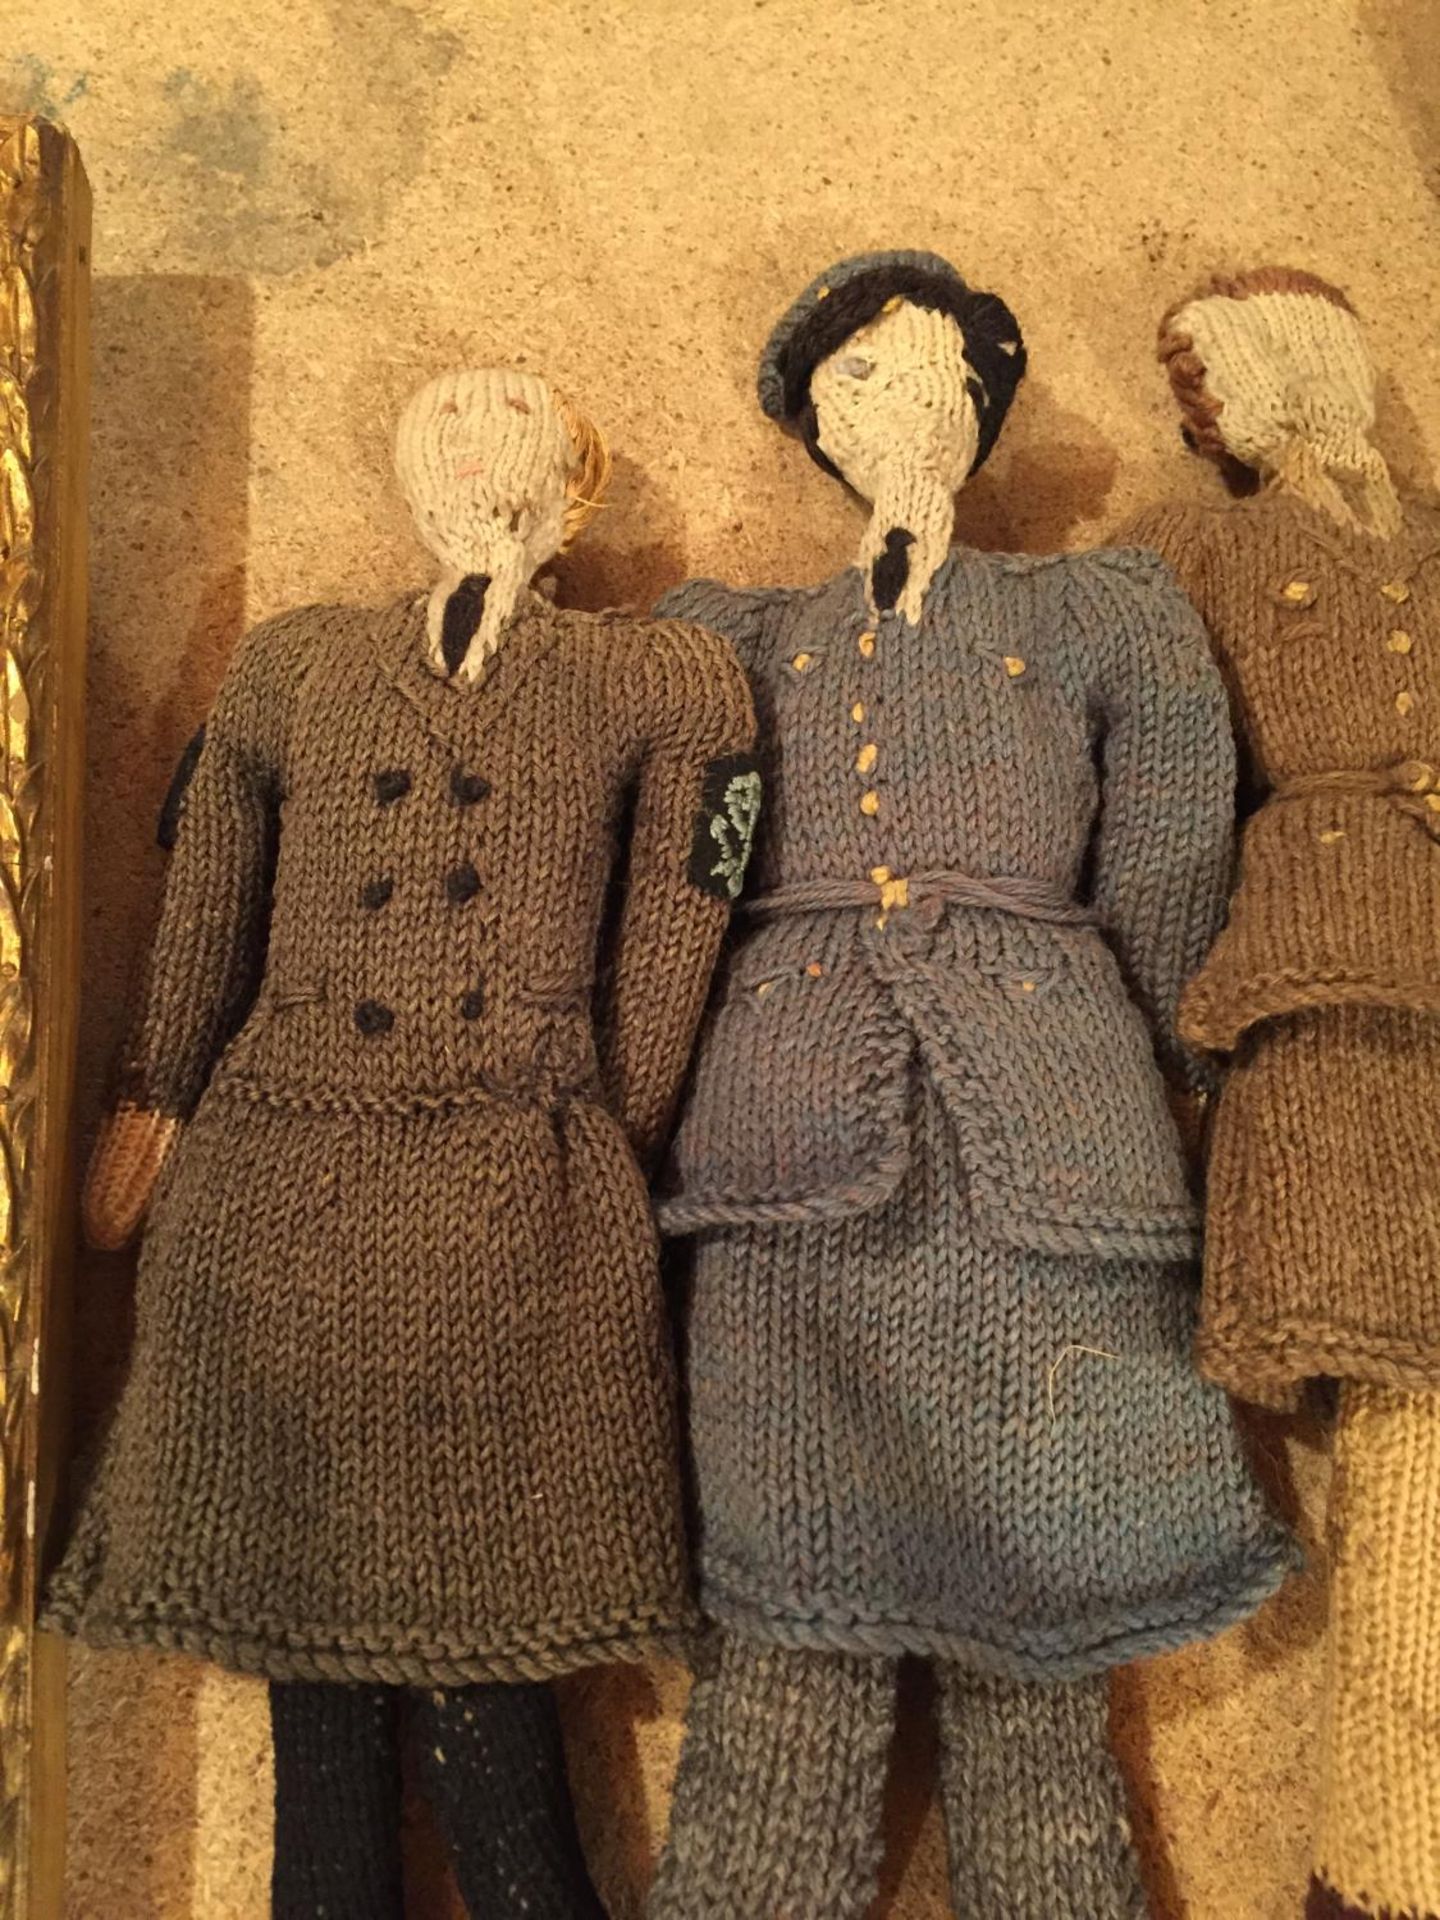 THREE HANDKNITTED WAR DOLLS IN THE GUISE OF A WREN, A WRAF AND AN ARMY LADY - Image 2 of 3